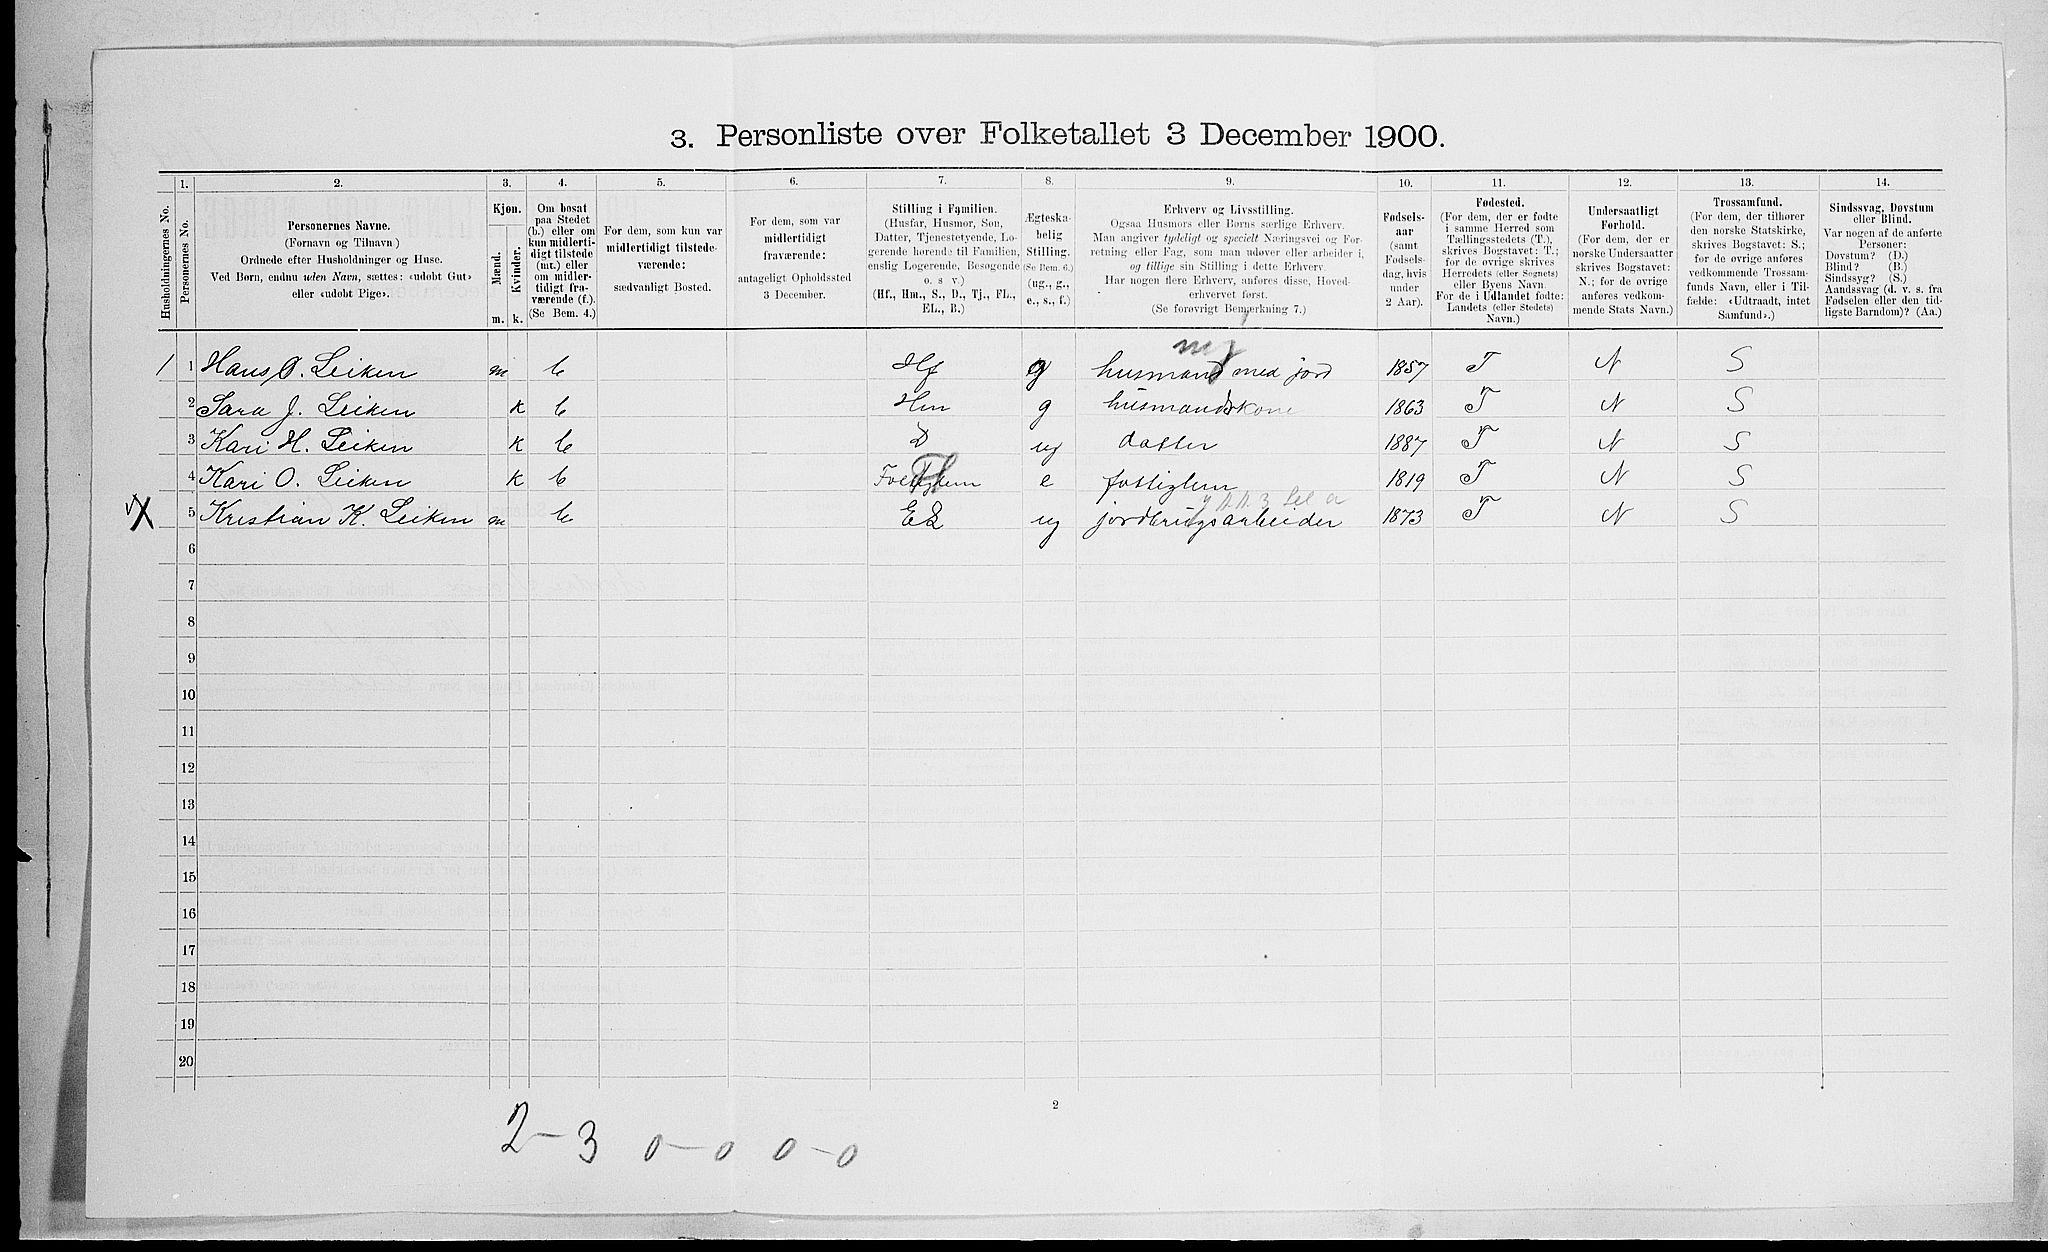 SAH, 1900 census for Nord-Fron, 1900, p. 104